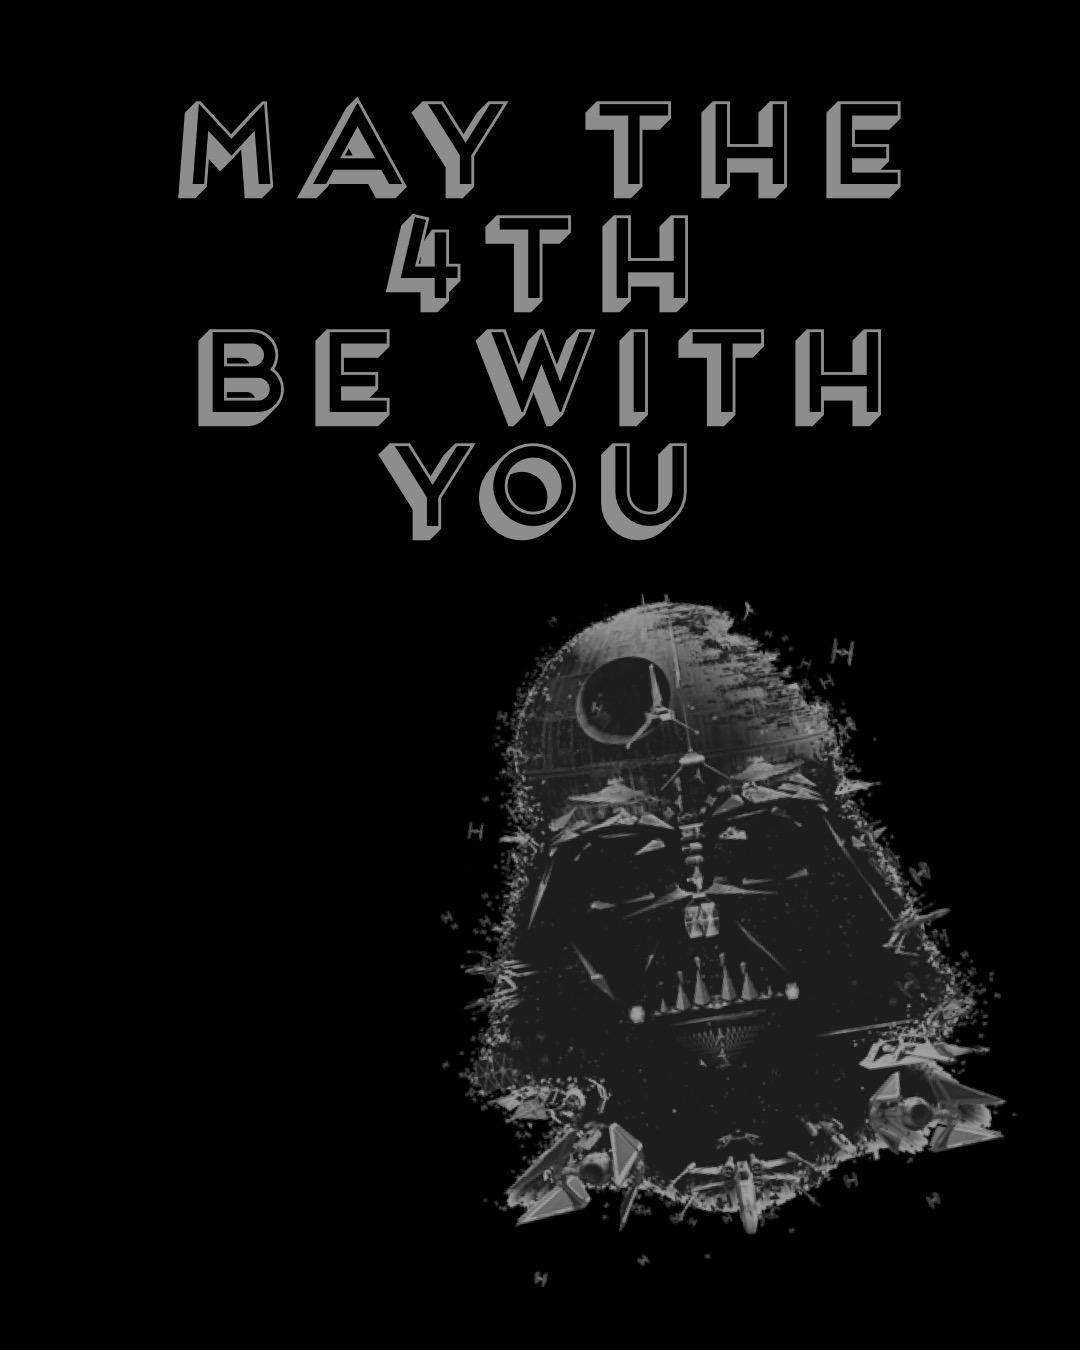 May the 4th Be With You.